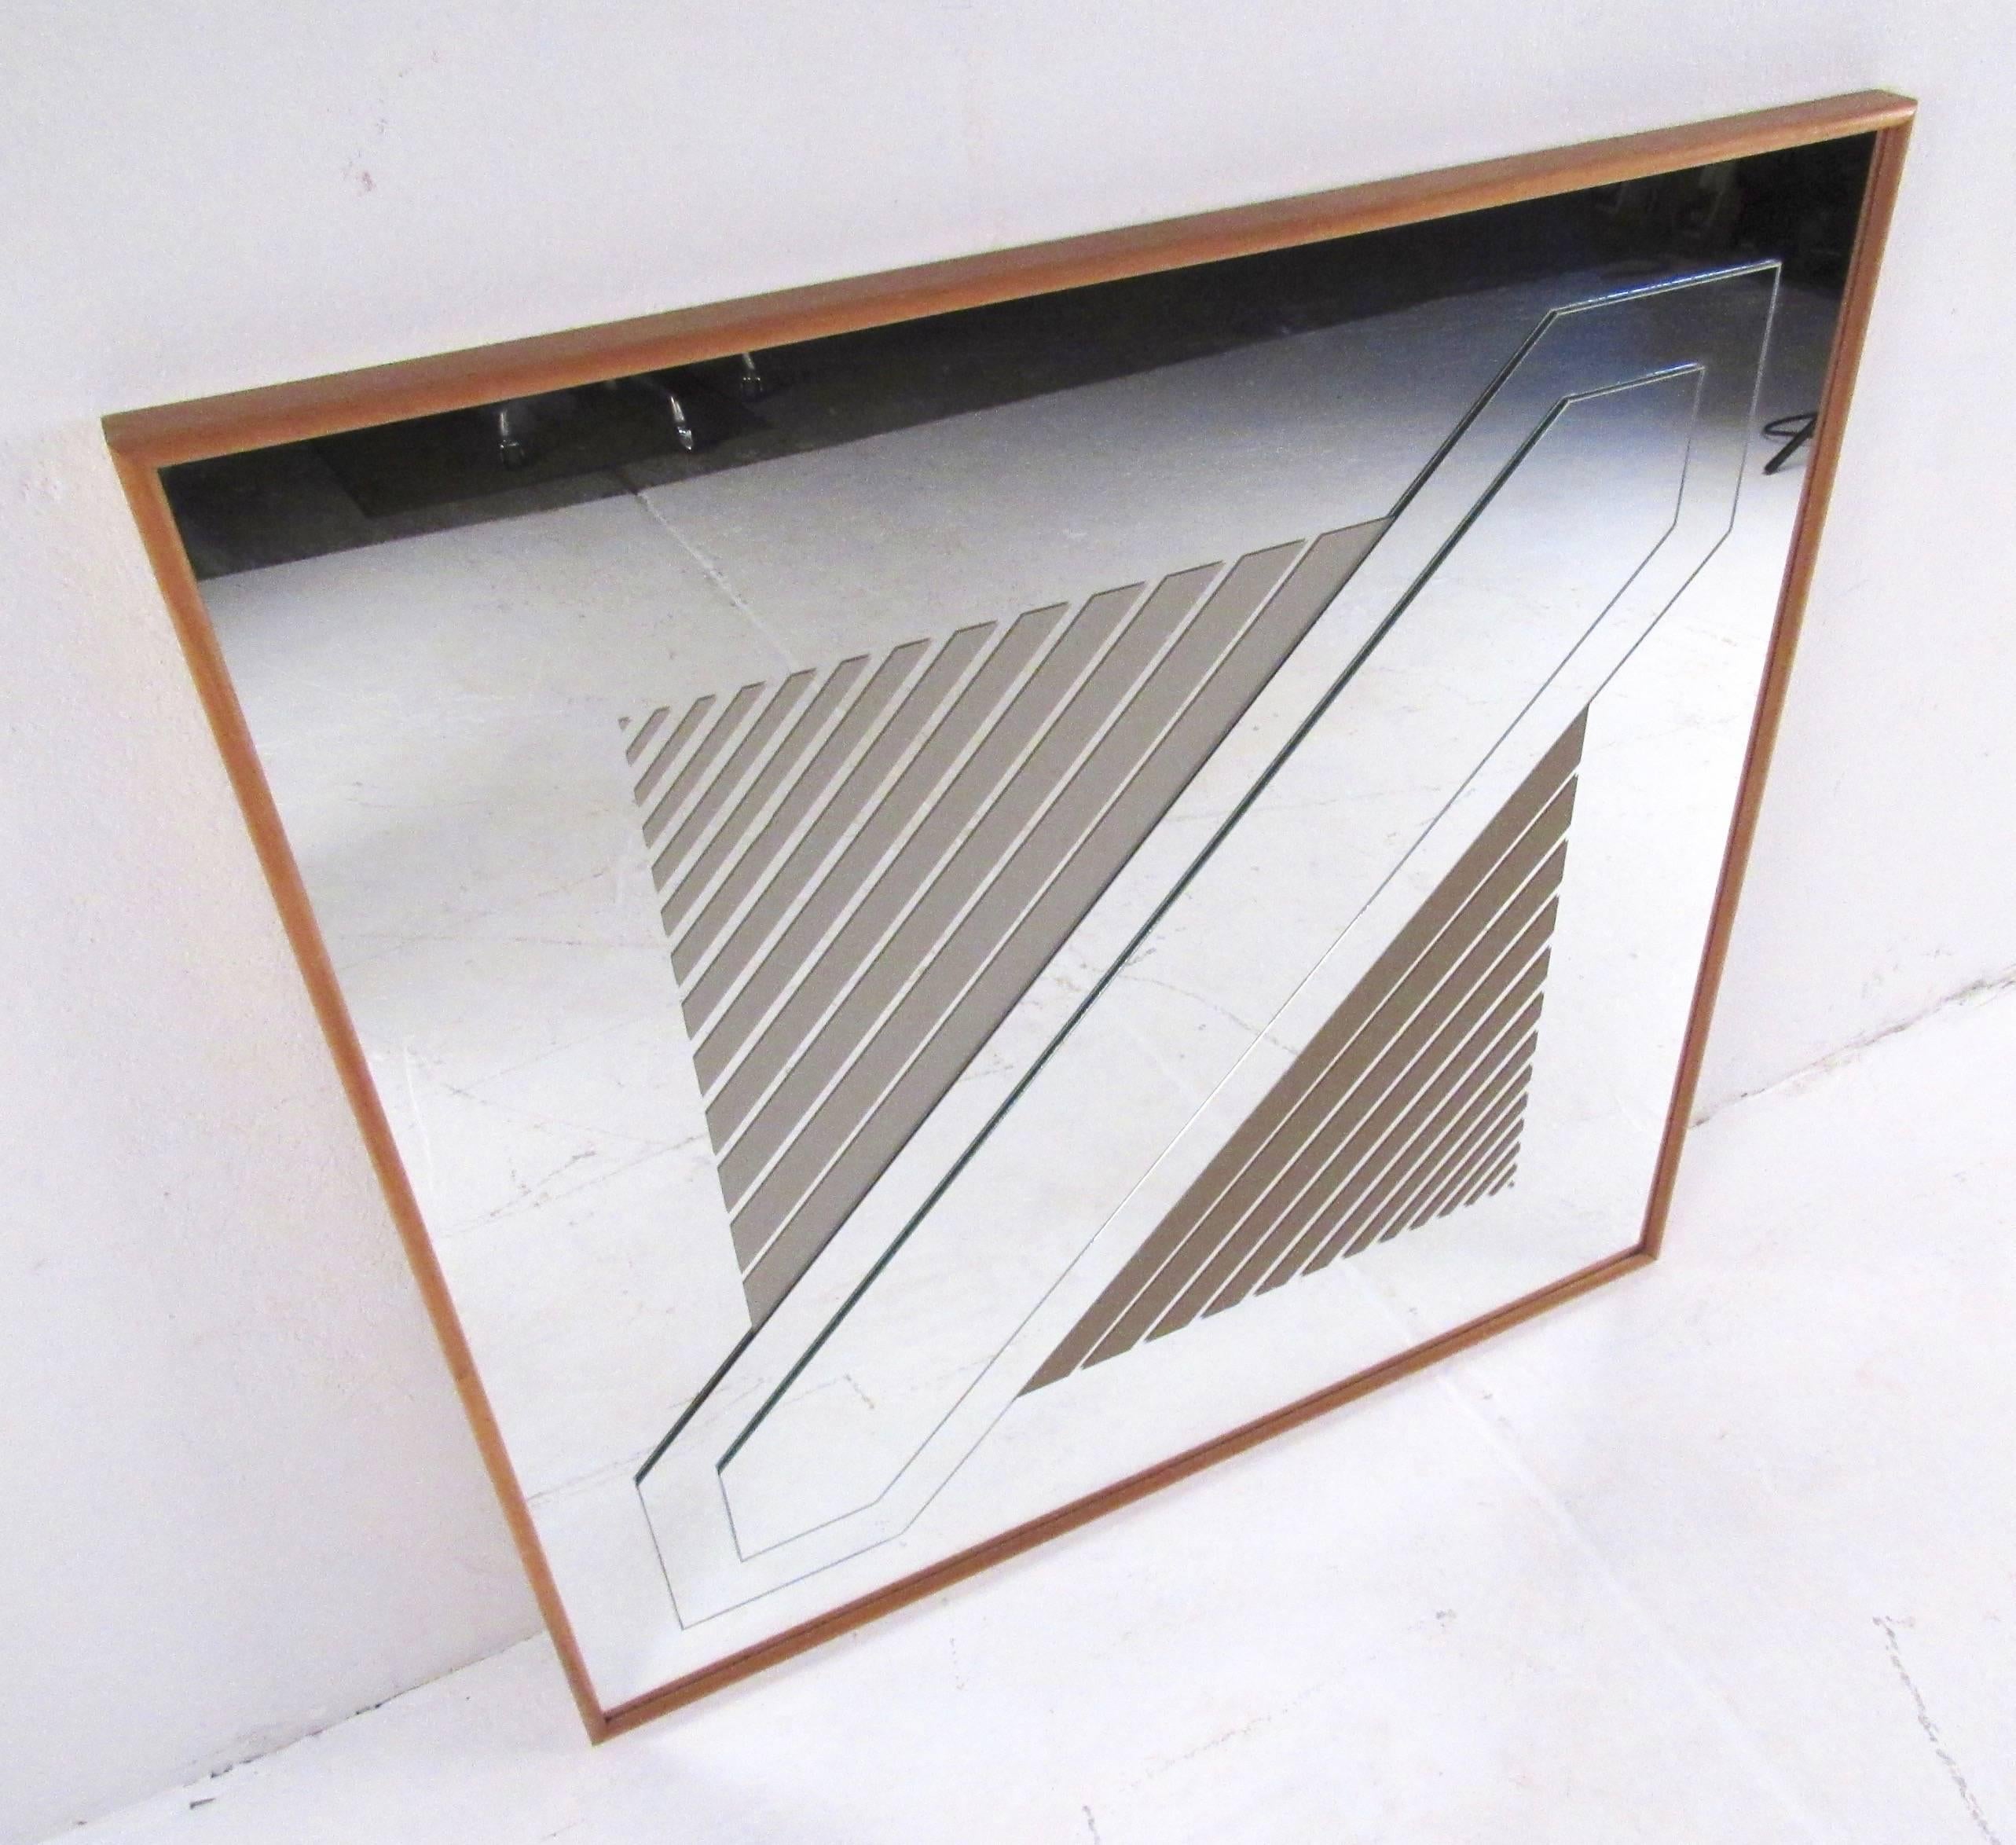 This vintage Mark Warren decorative mirror features geometric design in applied finish and etched glass pattern. Marked 1977, this vintage mirror comes mounted in a hardwood frame and makes a unique retro addition to home, business, or office.